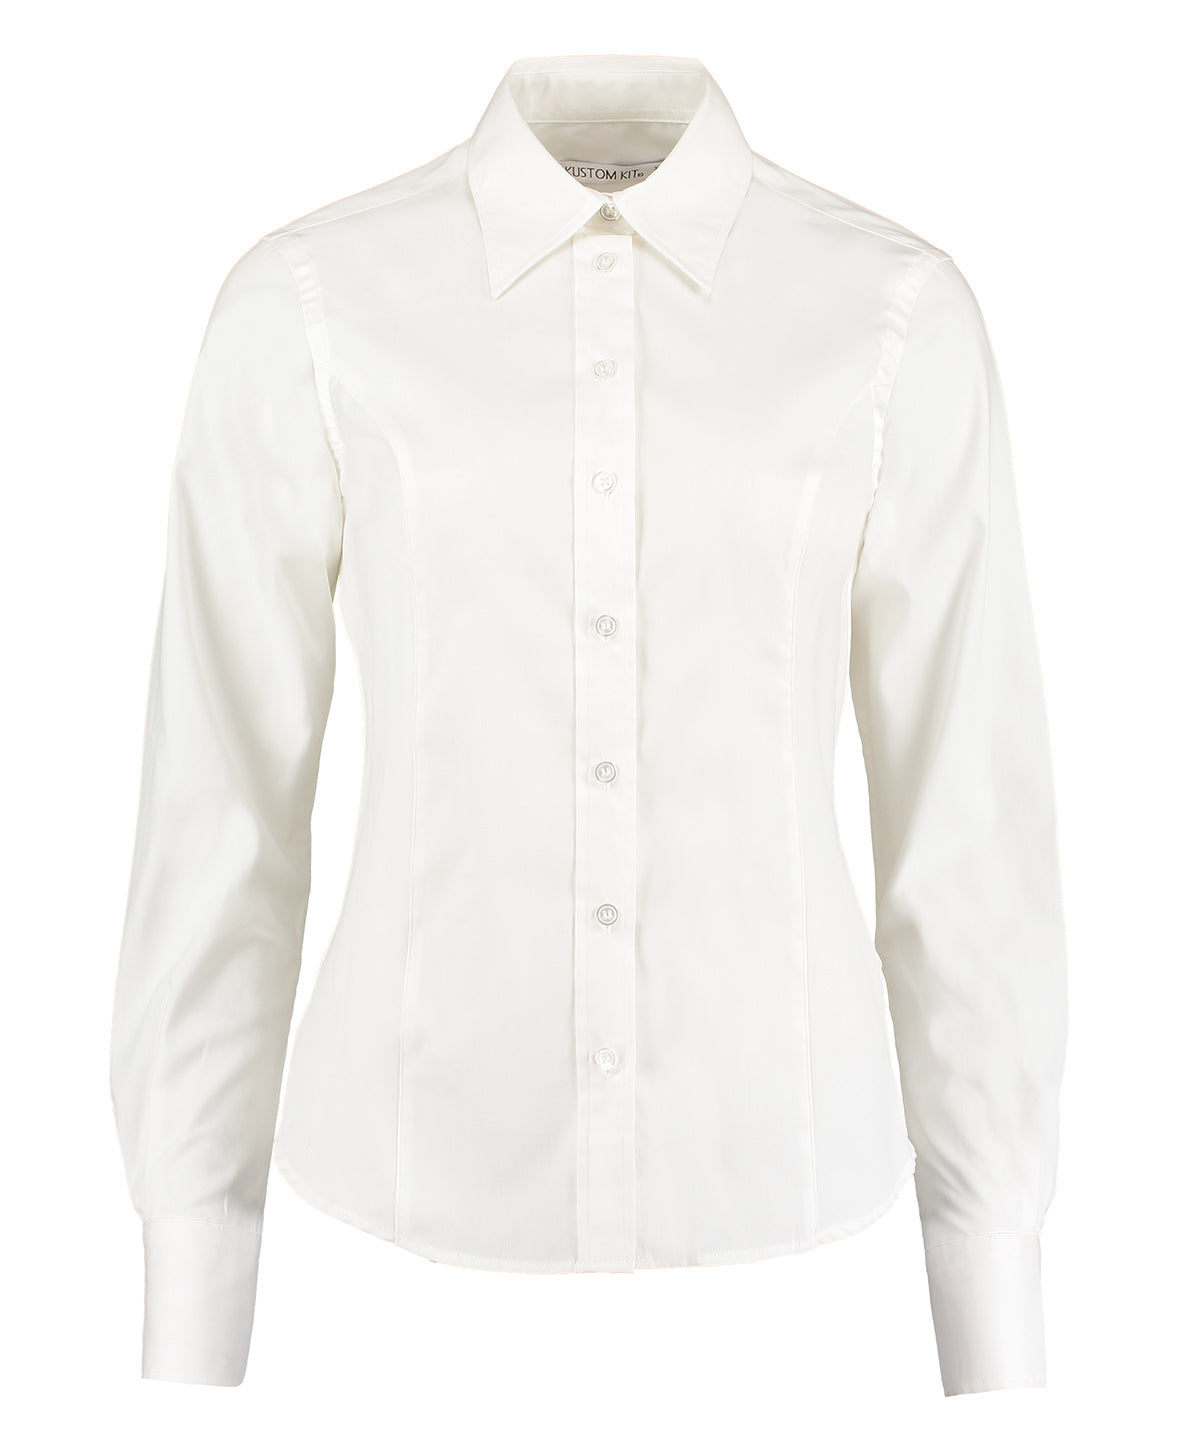 Blússur - Women's Corporate Oxford Blouse Long-sleeved (tailored Fit)